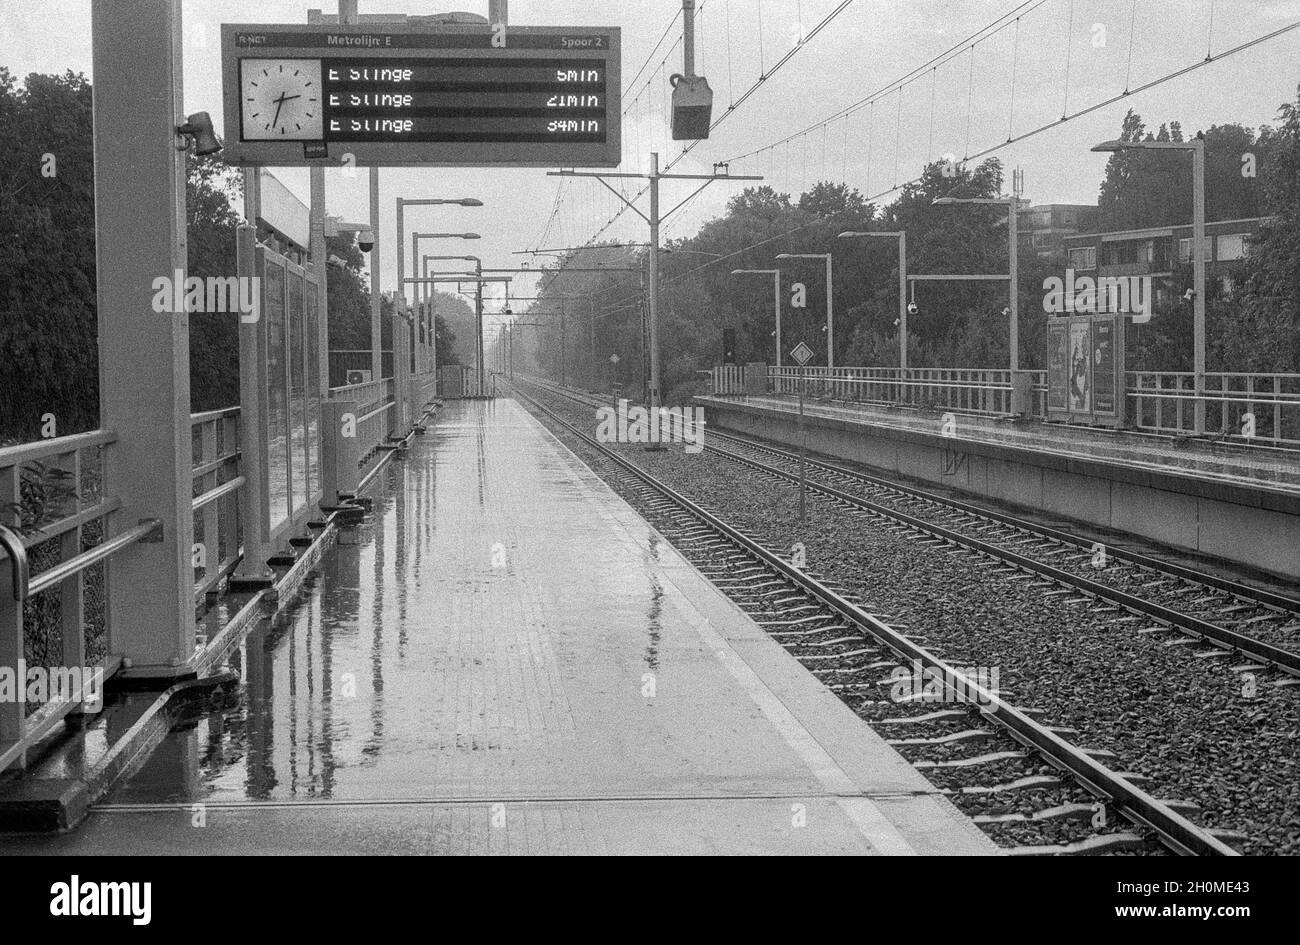 Rotterdam, Netherlands. A very rainy day at an elevated subway station's platform, where it should have been sunny and warm. Climate Change causes a huge increase in Rain and Storm at locations they can actually cause a lot of damage to, f.e. infrastructure. Collection: gkf-analoog Stock Photo